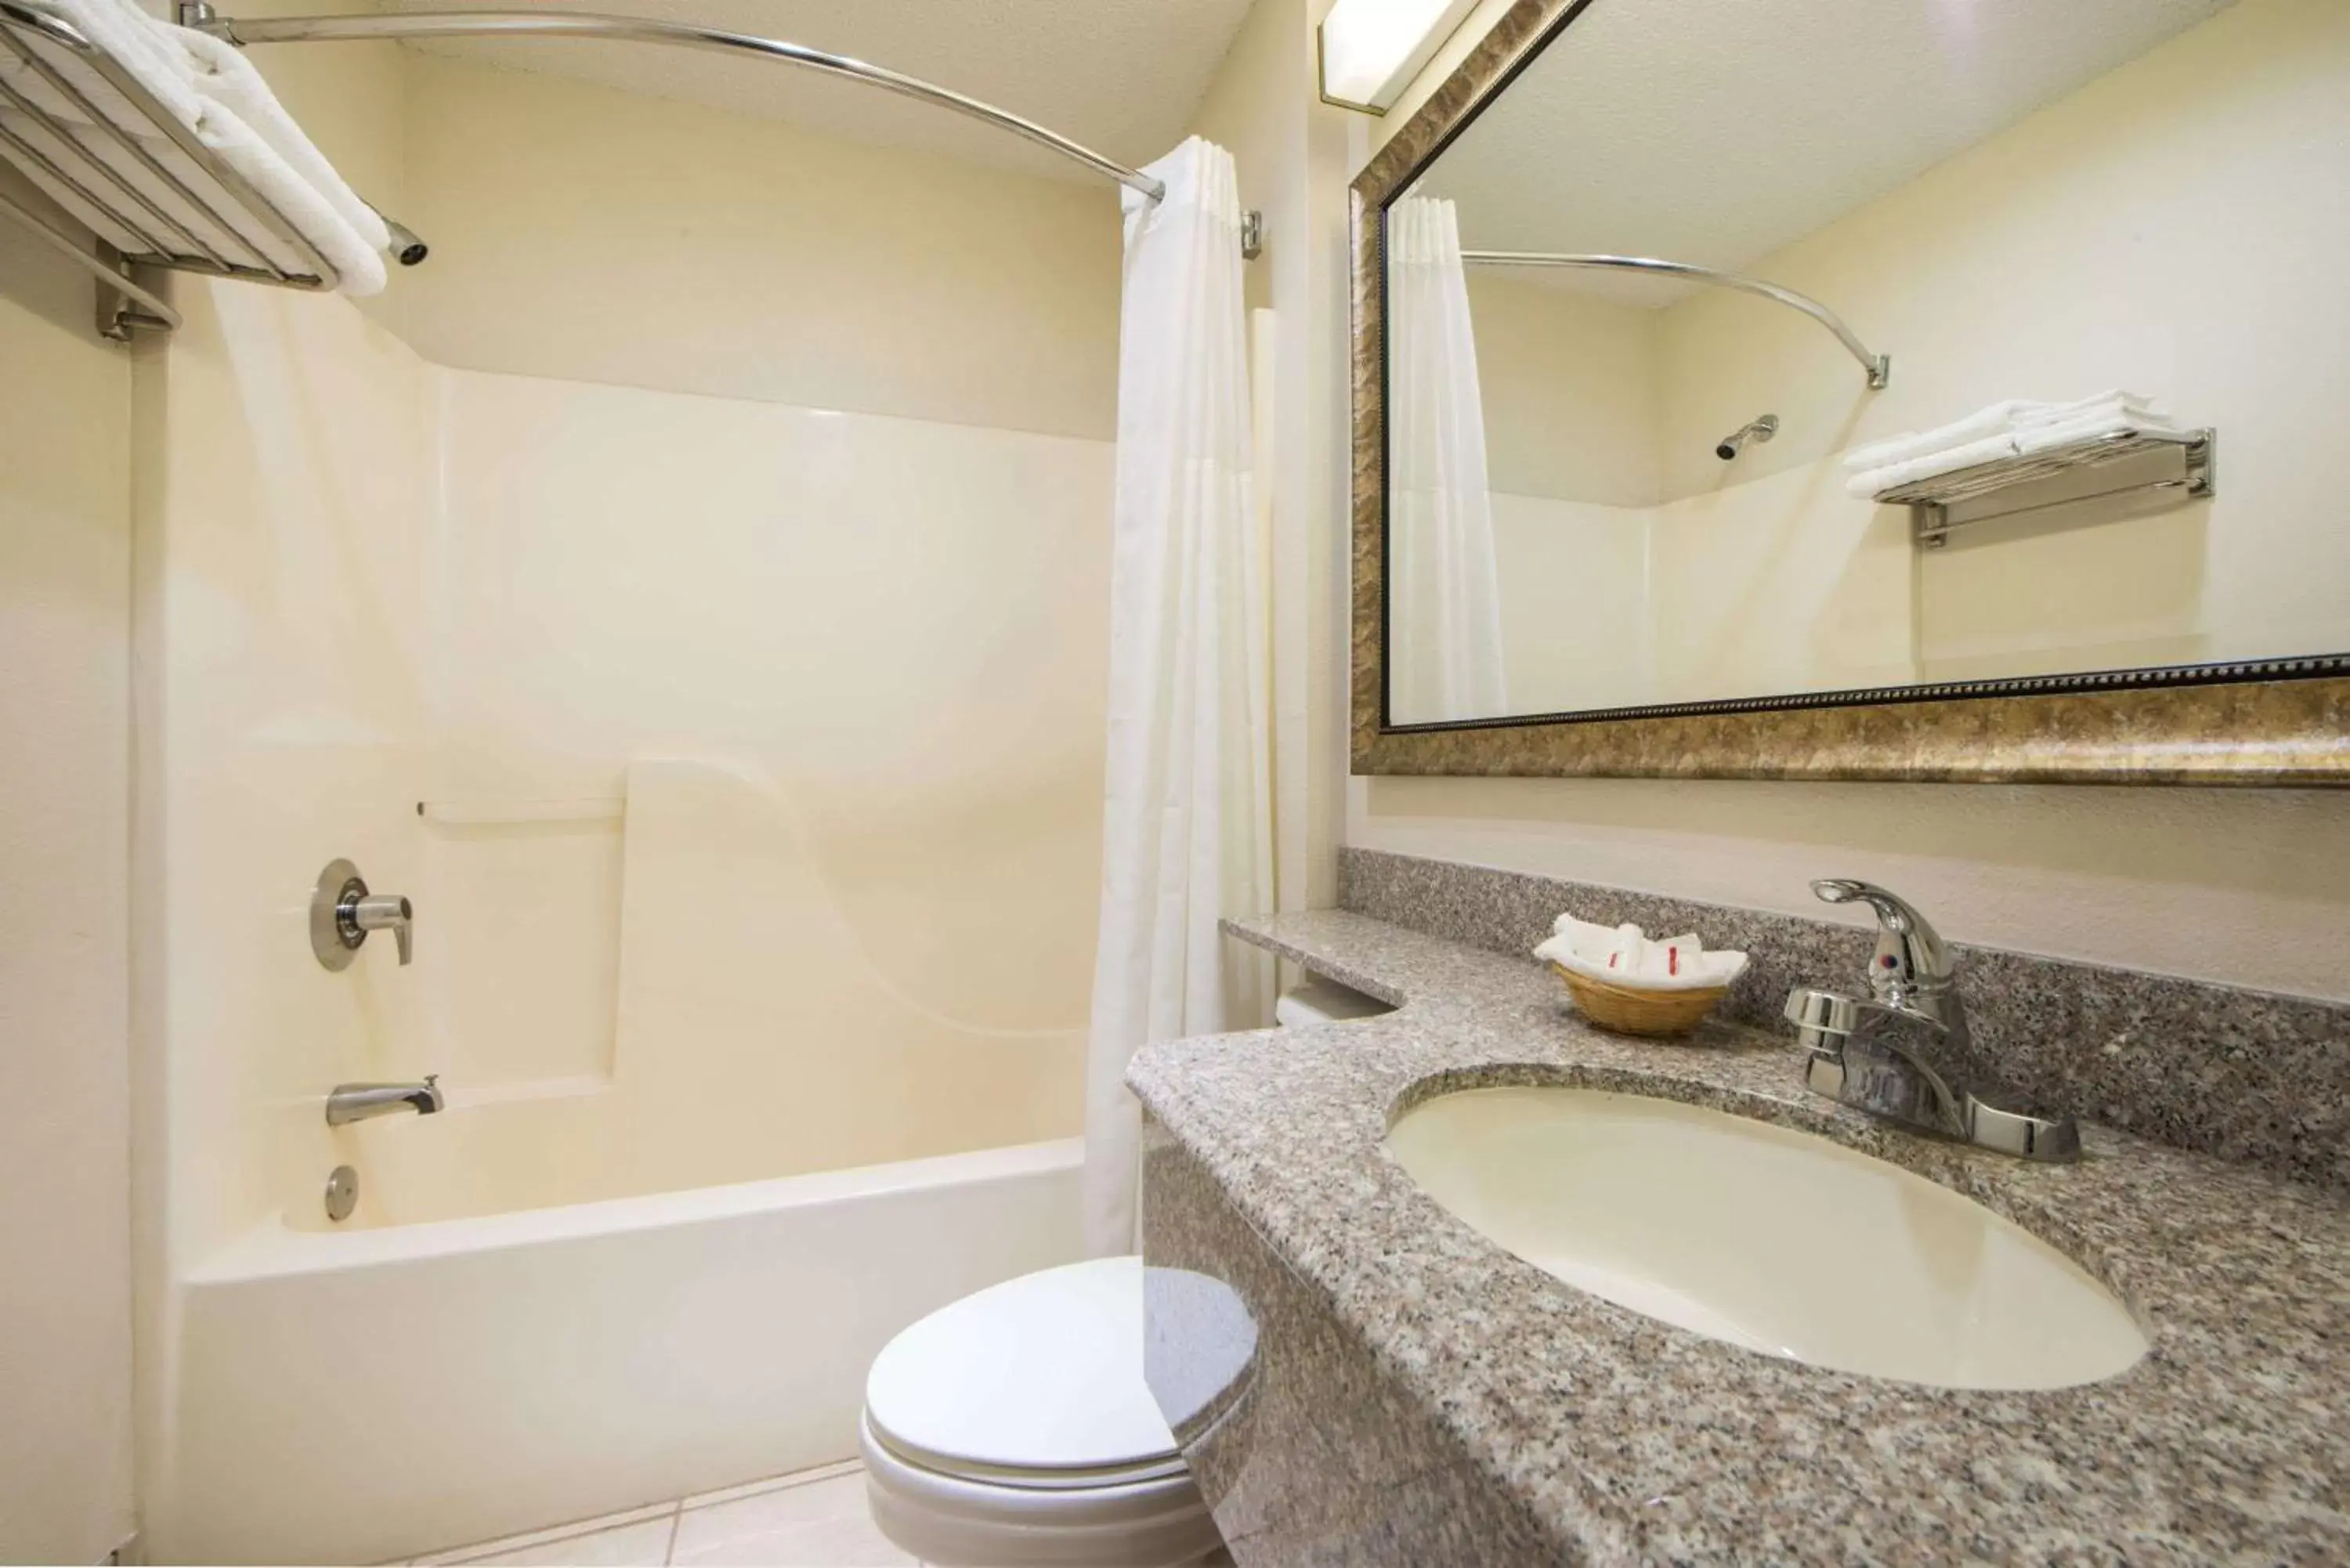 Bathroom in Microtel Inn & Suites by Wyndham Tulsa - Catoosa Route 66